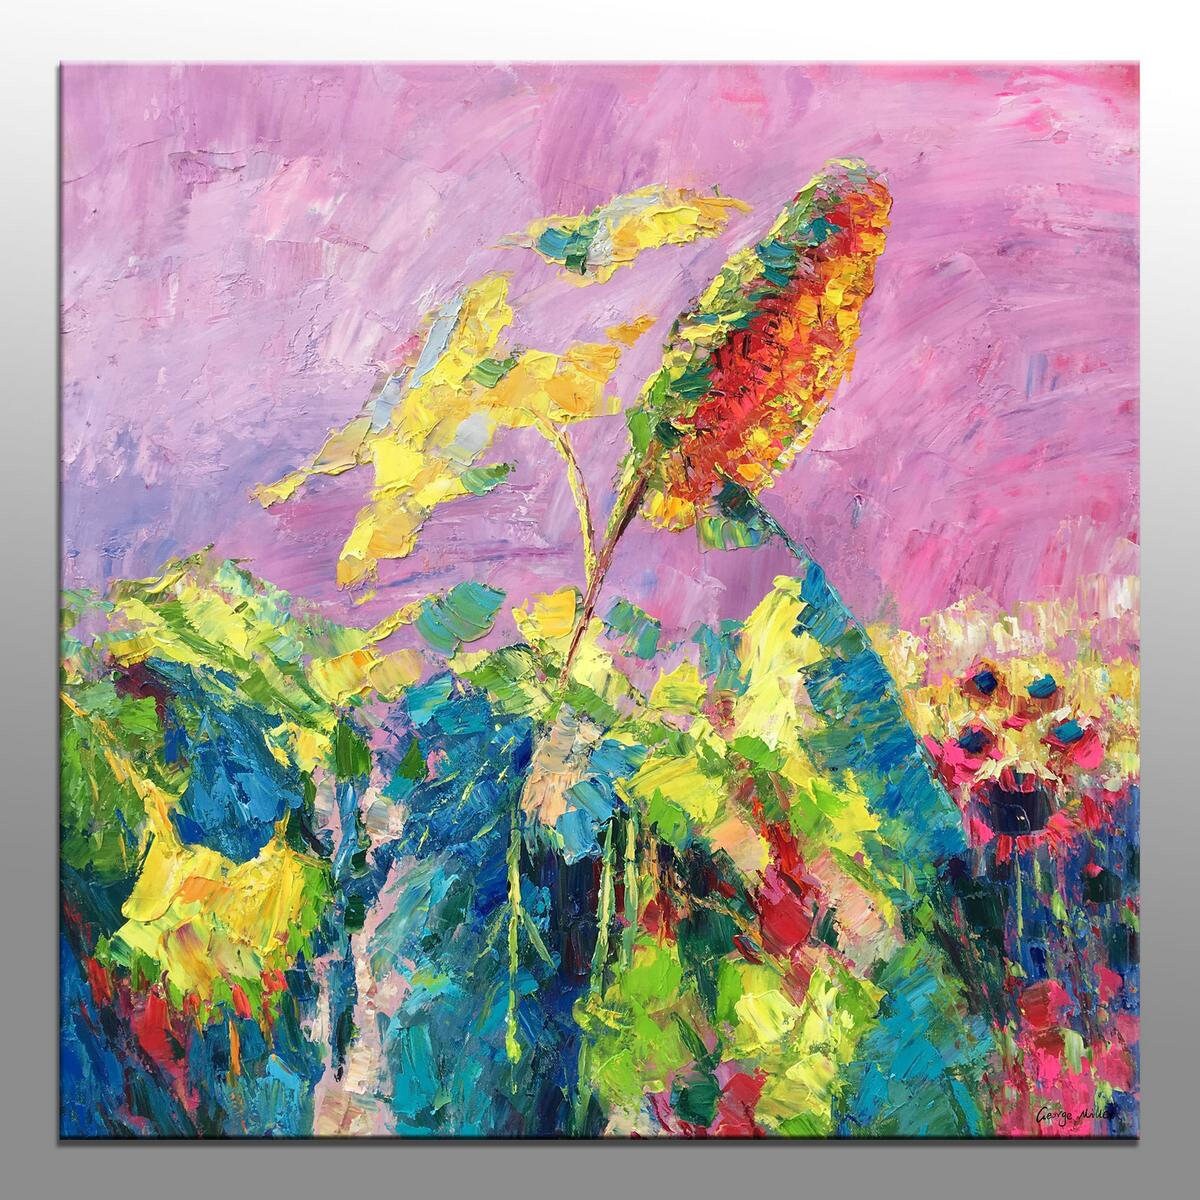 Sunflowers Oil Painting, Floral Painting, Oil Painting Square, Large Art, Original Art, Abstract Floral Painting, Palette Knife Painting